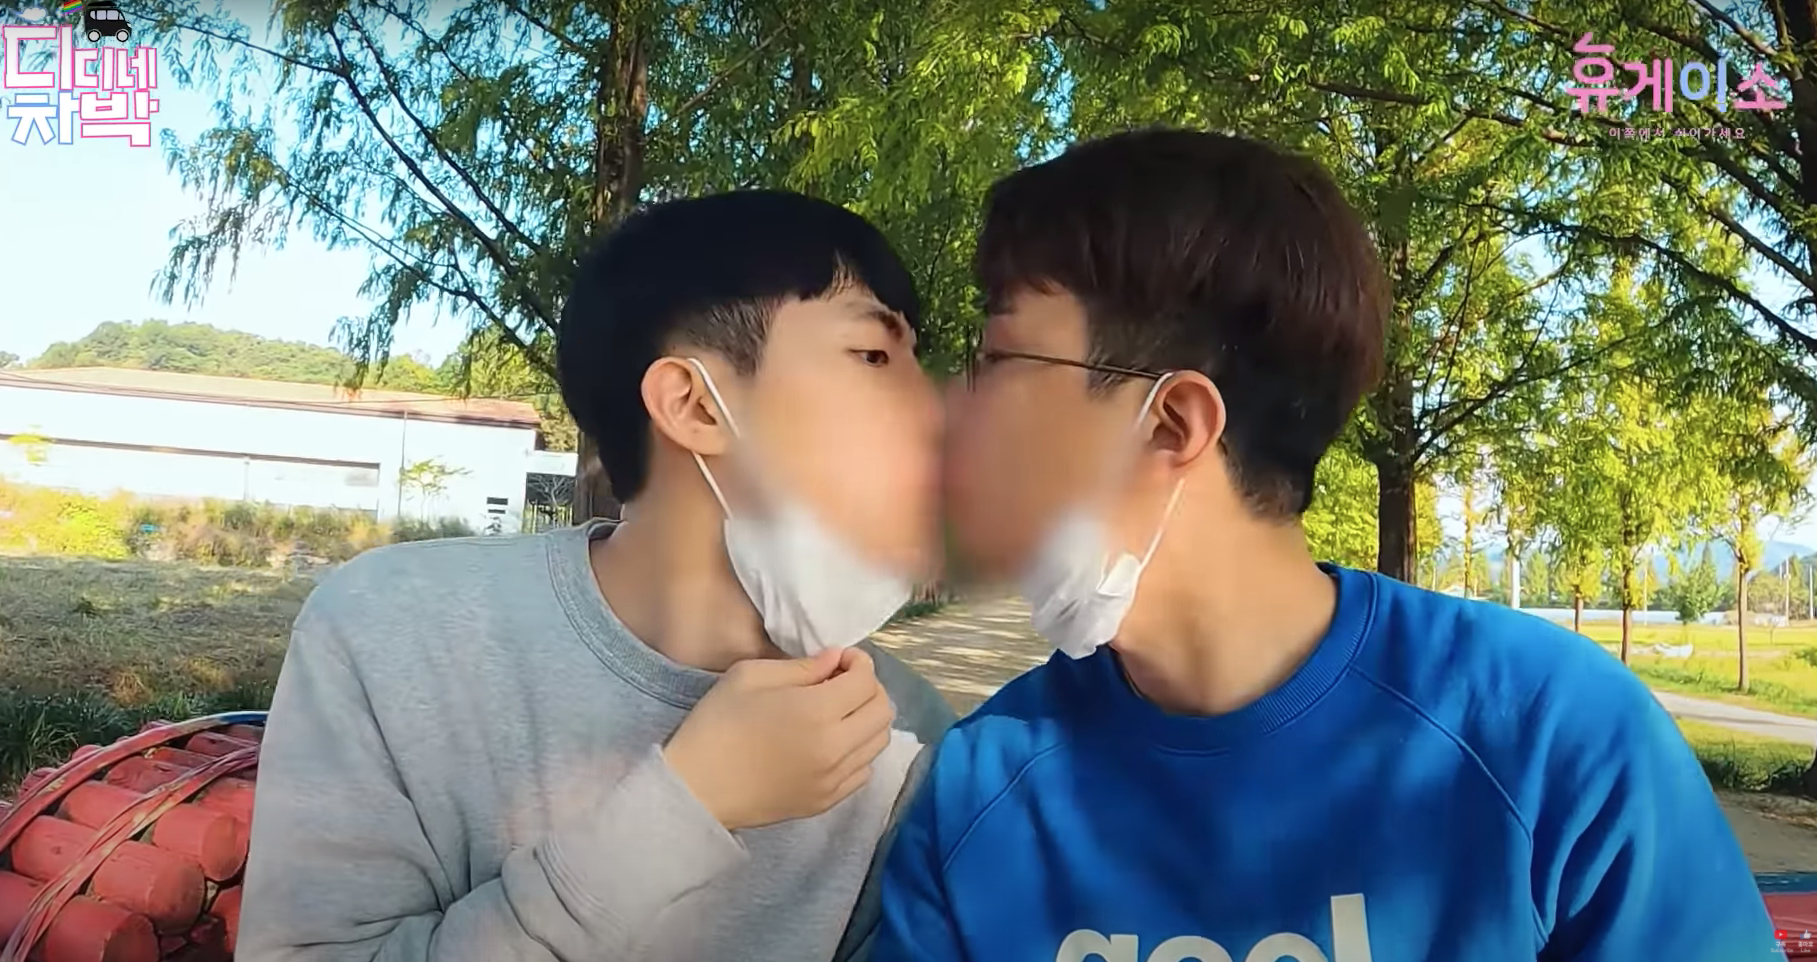 Meet the queer Korean couples vlogging their lives together photo